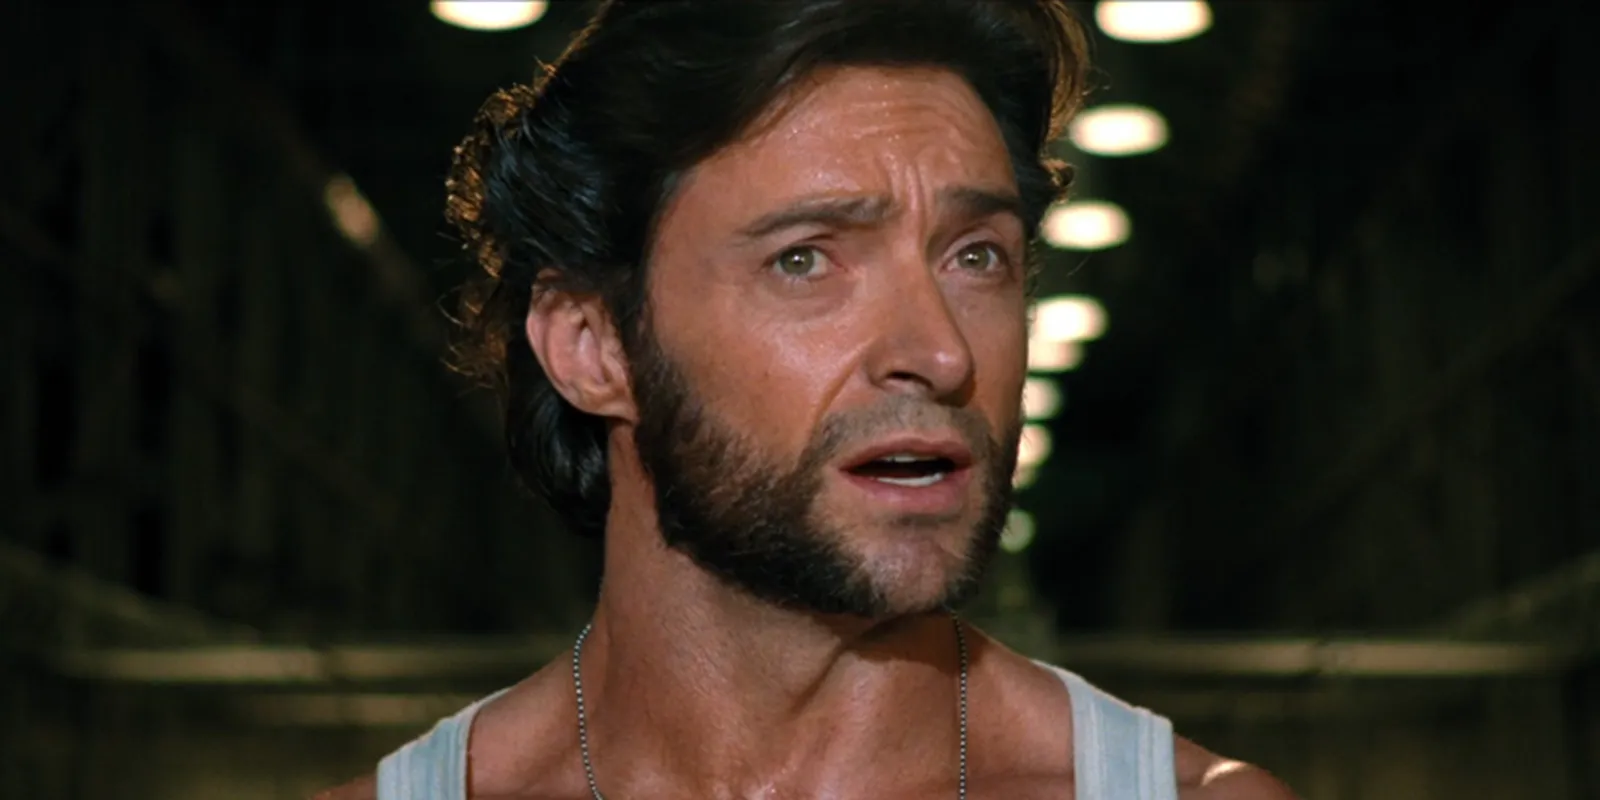 Which X-Men movie featured a time-travel plot that involved Wolverine's consciousness being sent back to the 1970s?